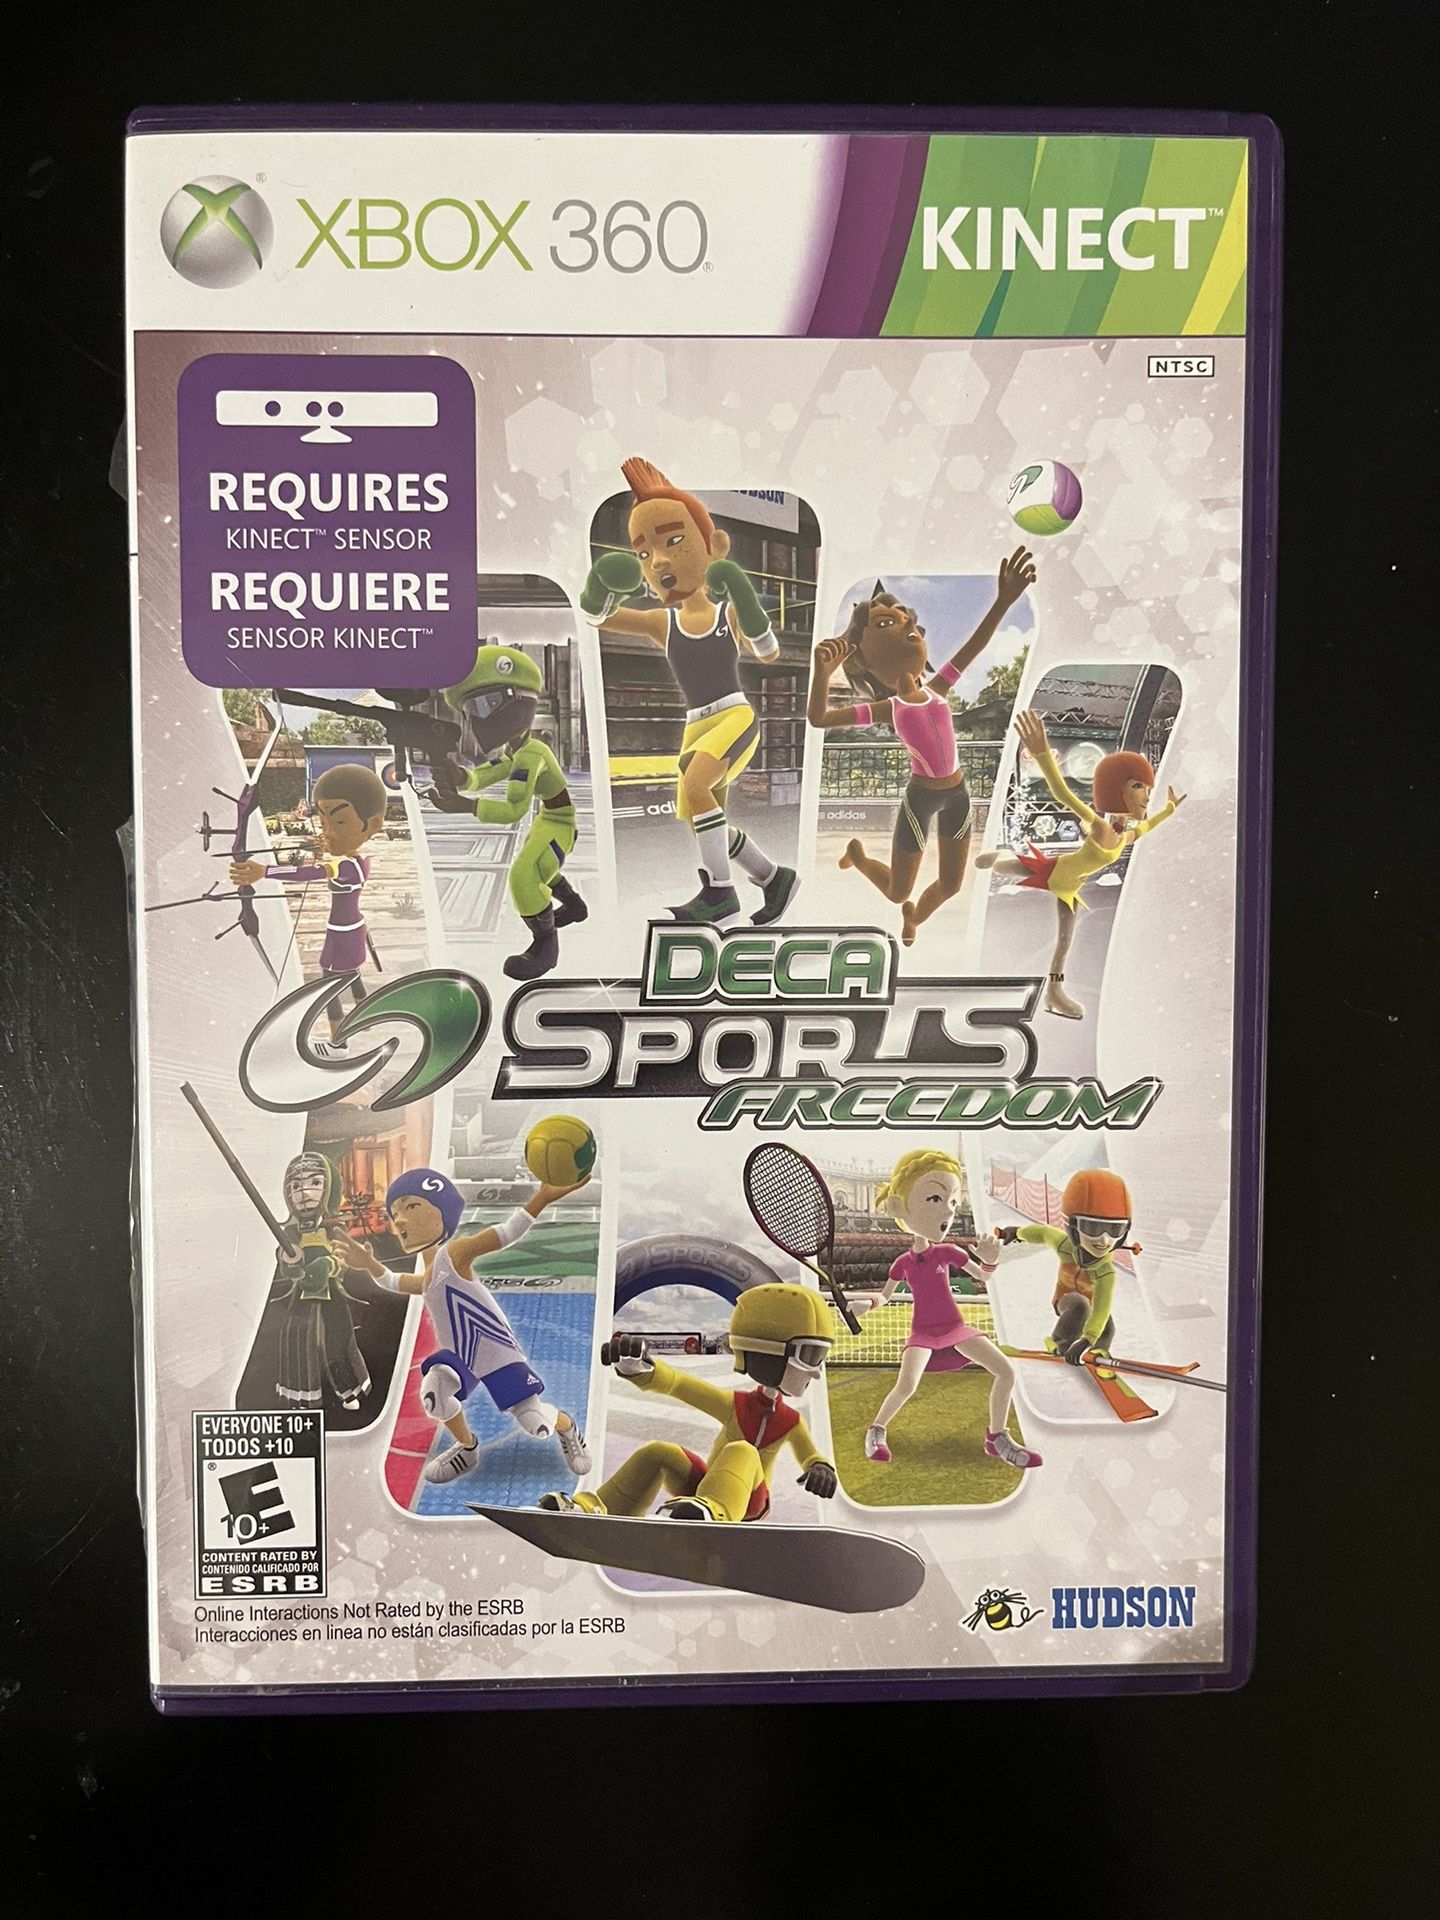 XBOX 360 Kinect Games - Deca Sports Freedom & Adventures 